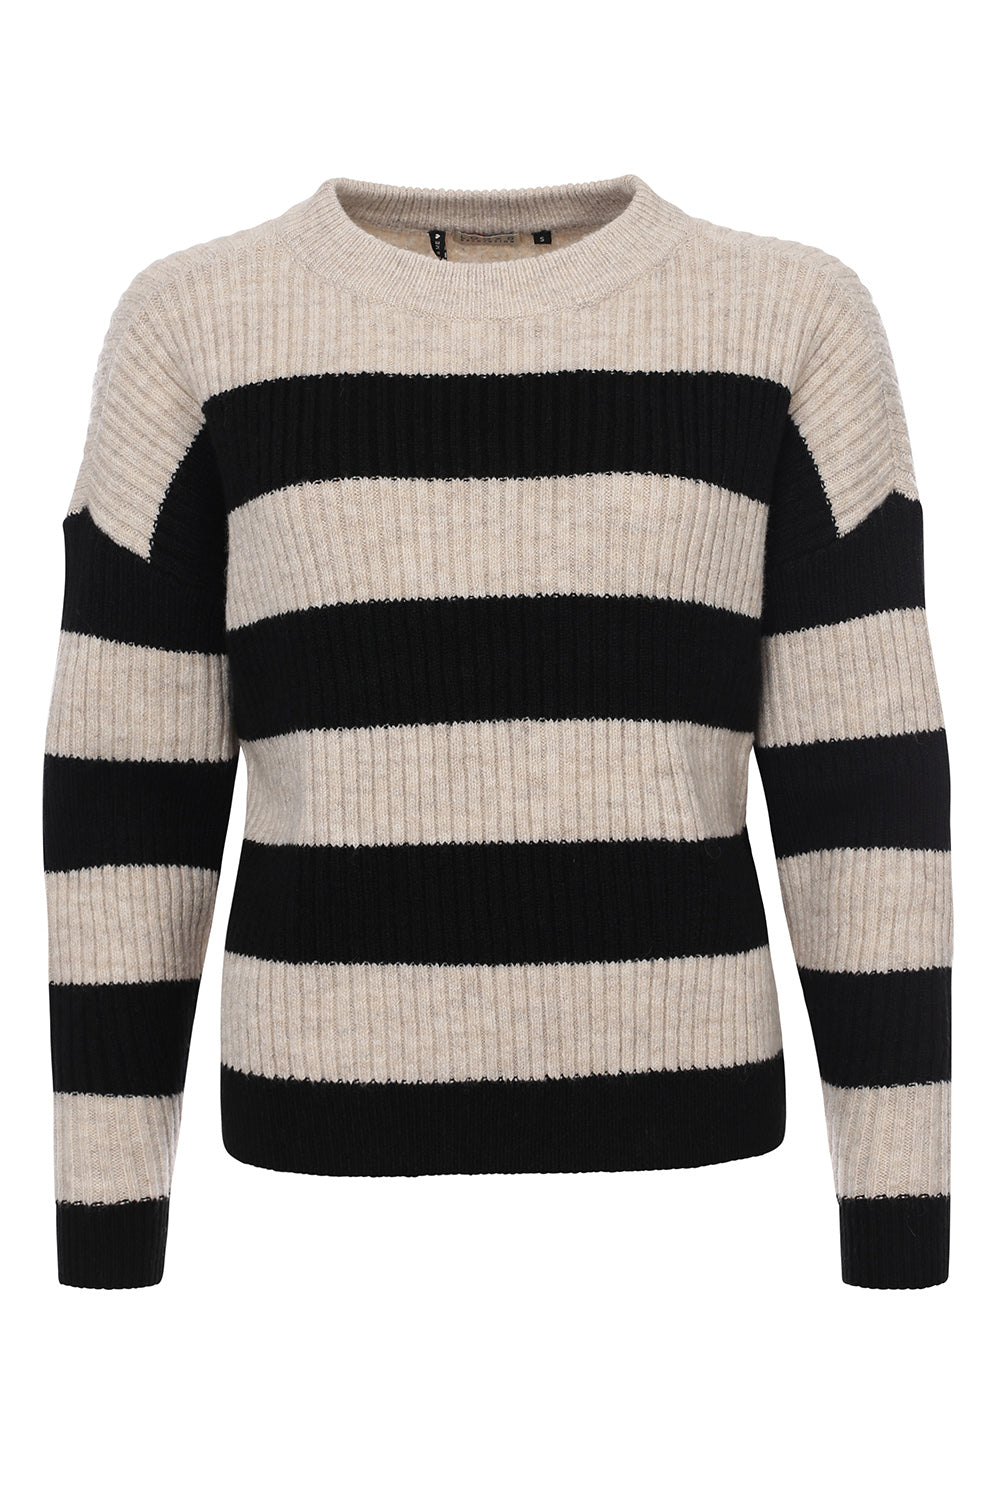 Looxs Ladies Knitted Striped Pullover